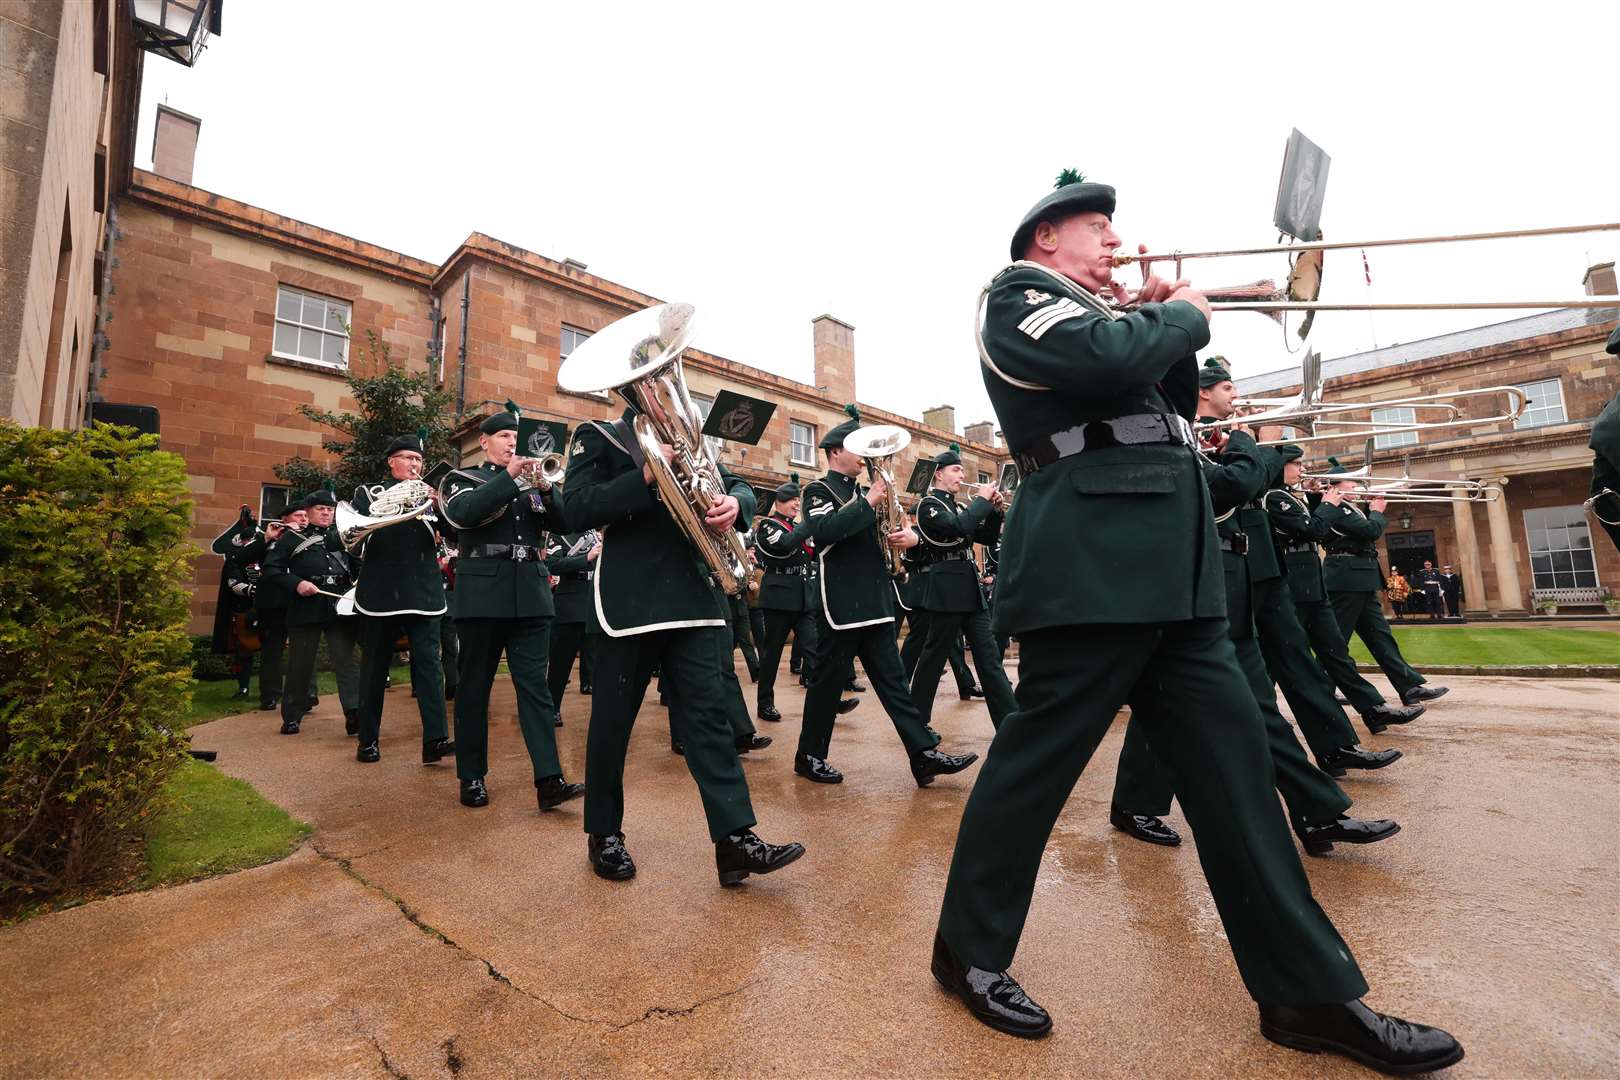 The Royal Irish Regiment (RIR) band led a procession of a Proclamation Guard from the 2nd Battalion of the RIR (Kelvin Boyes/PA)